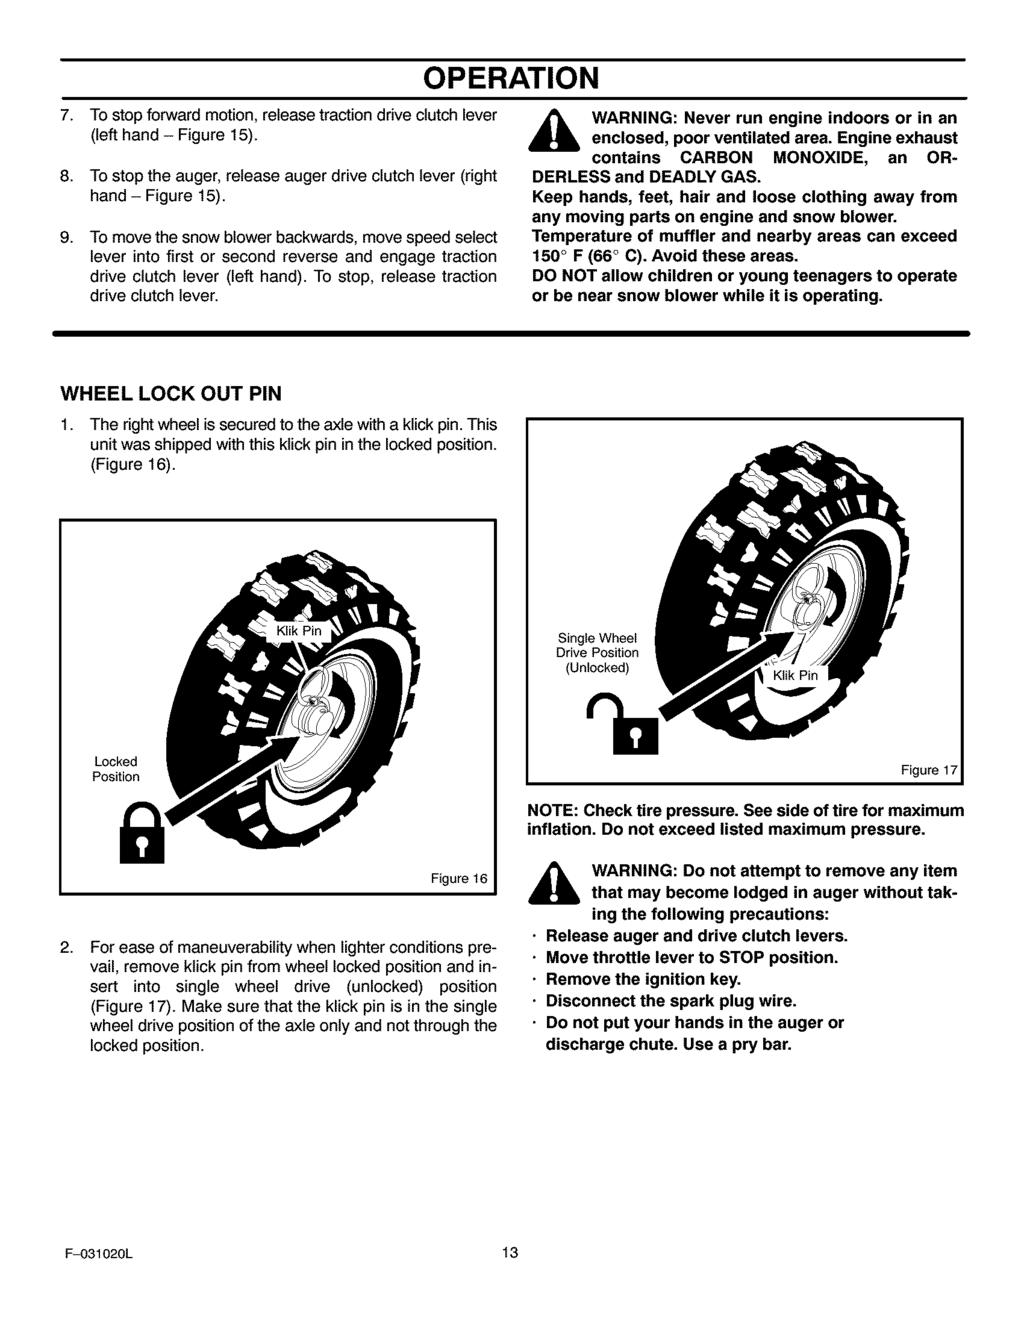 OPERATION 7. To stop forward motion, release traction drive clutch lever (left hand - Figure 15). 8. To stop the auger, release auger drive clutch lever (right hand - Figure 15). 9.